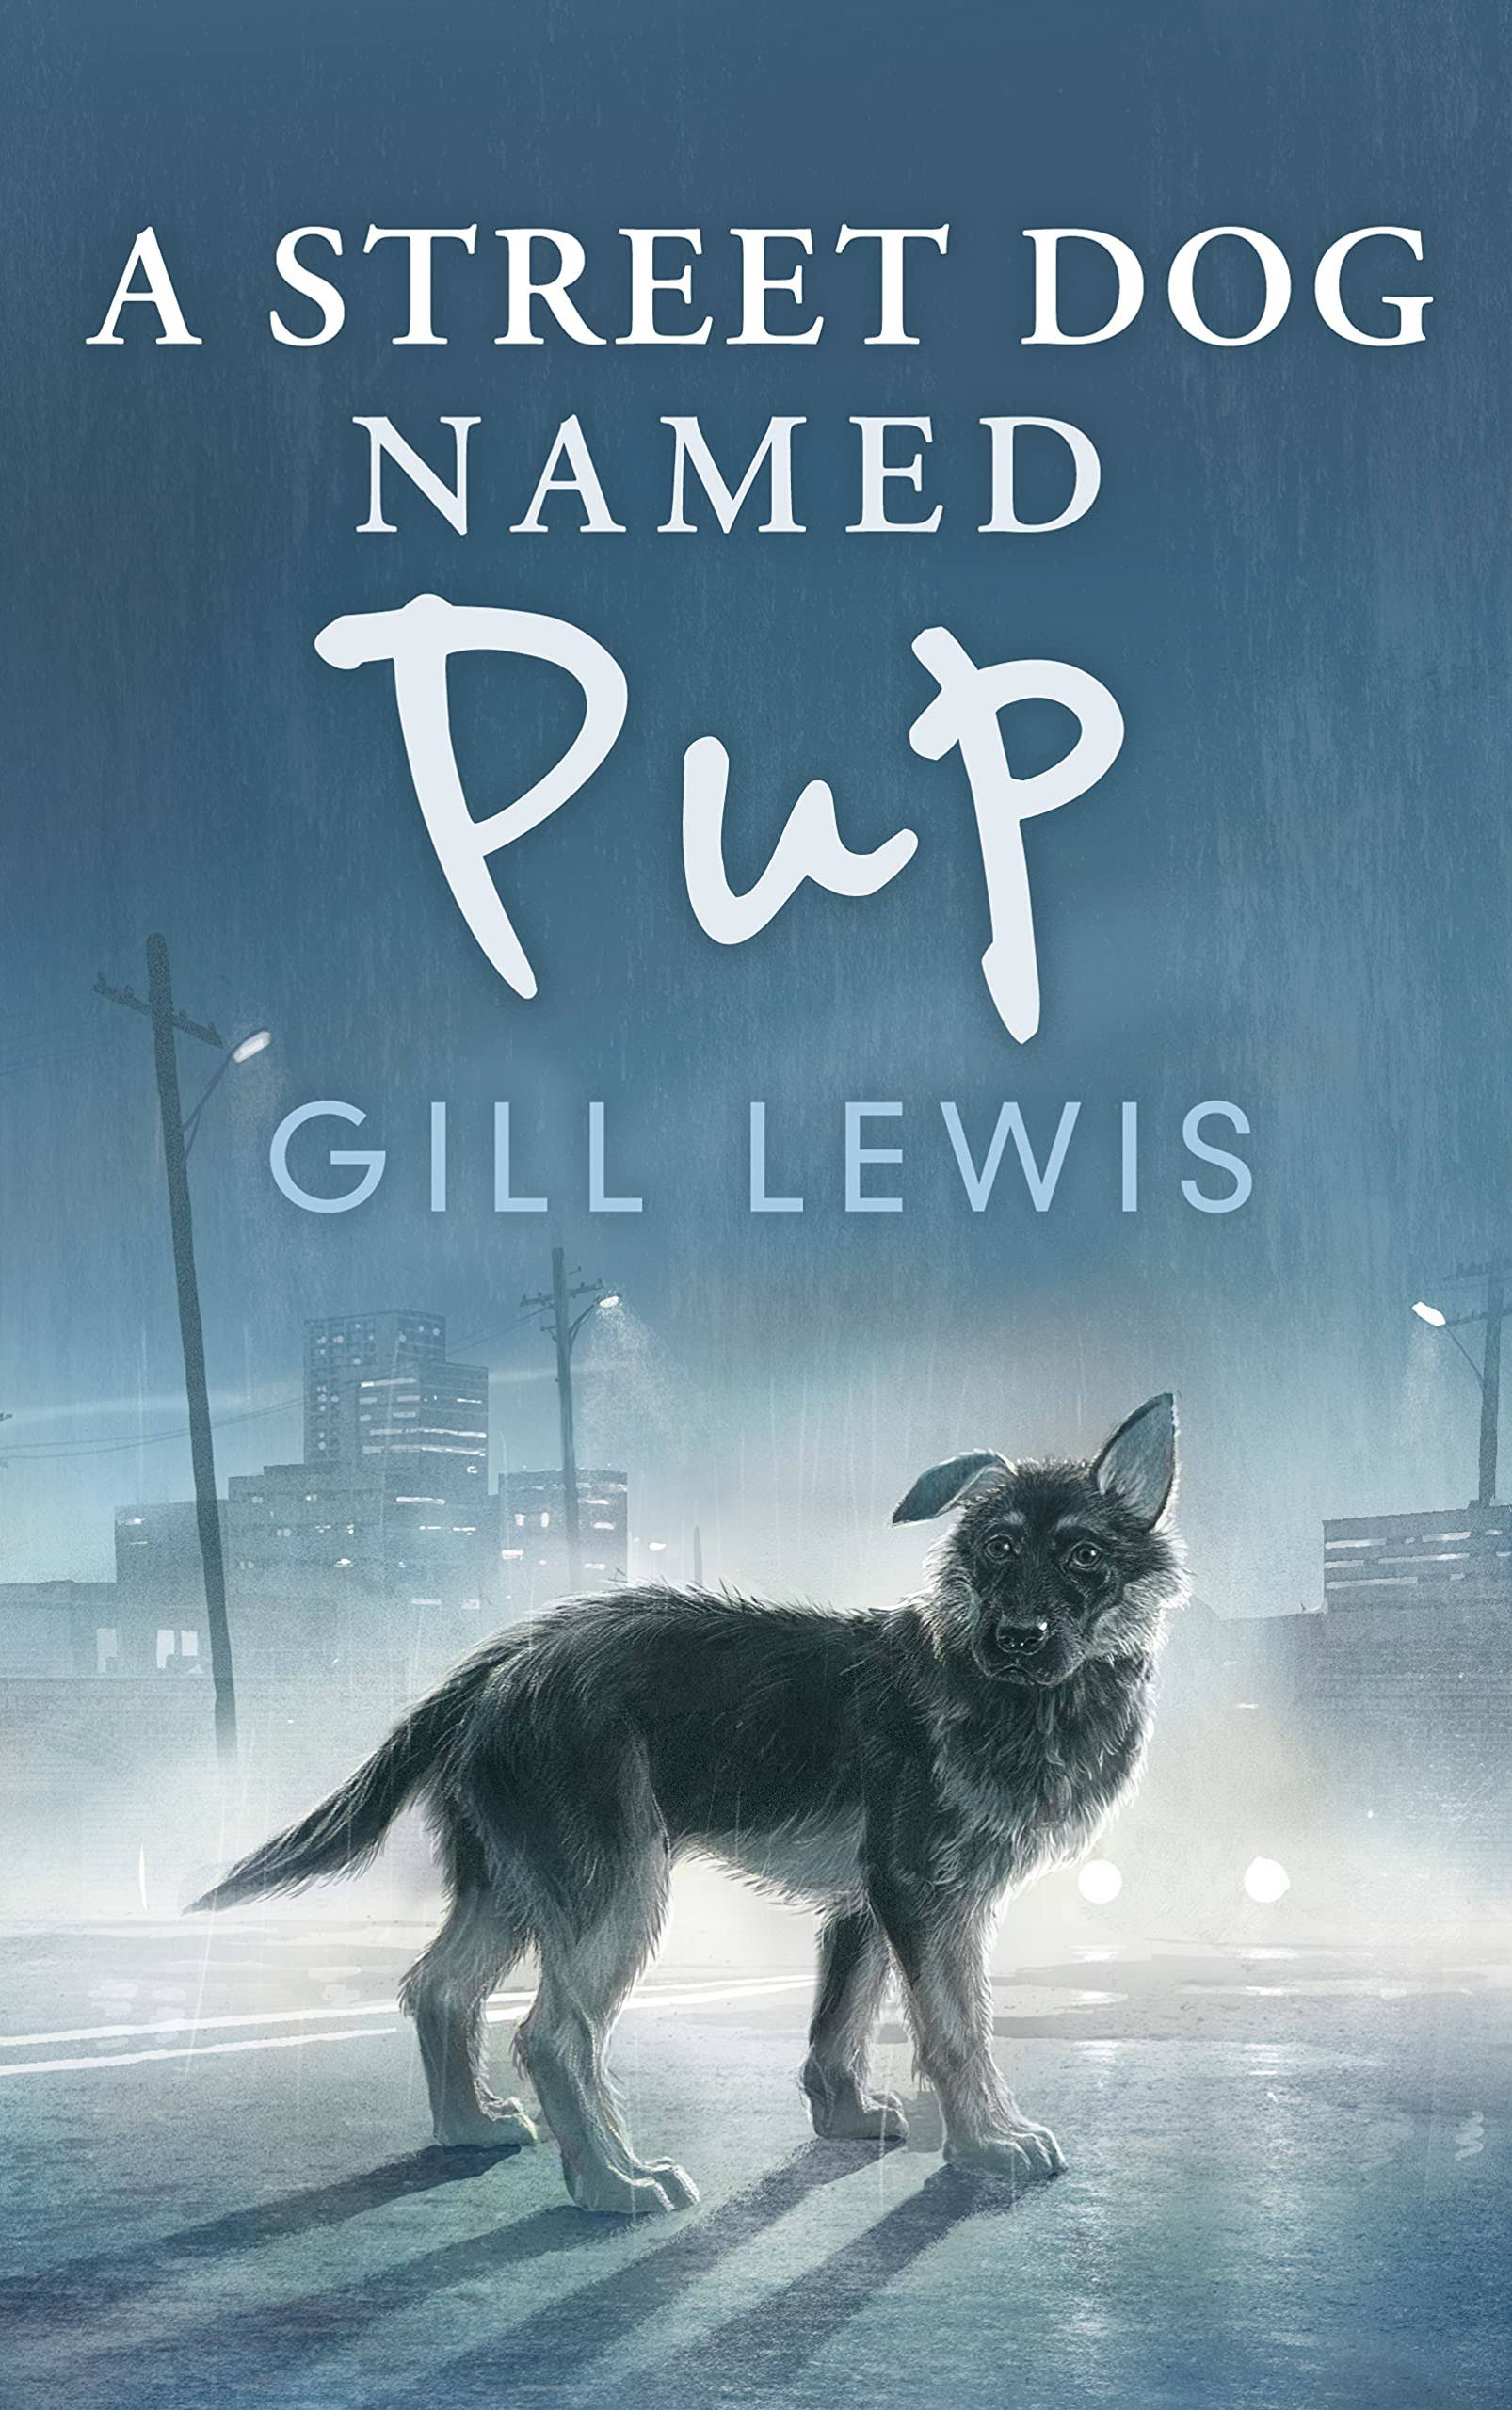 A Street Dog Named Pup by Gill Lewis